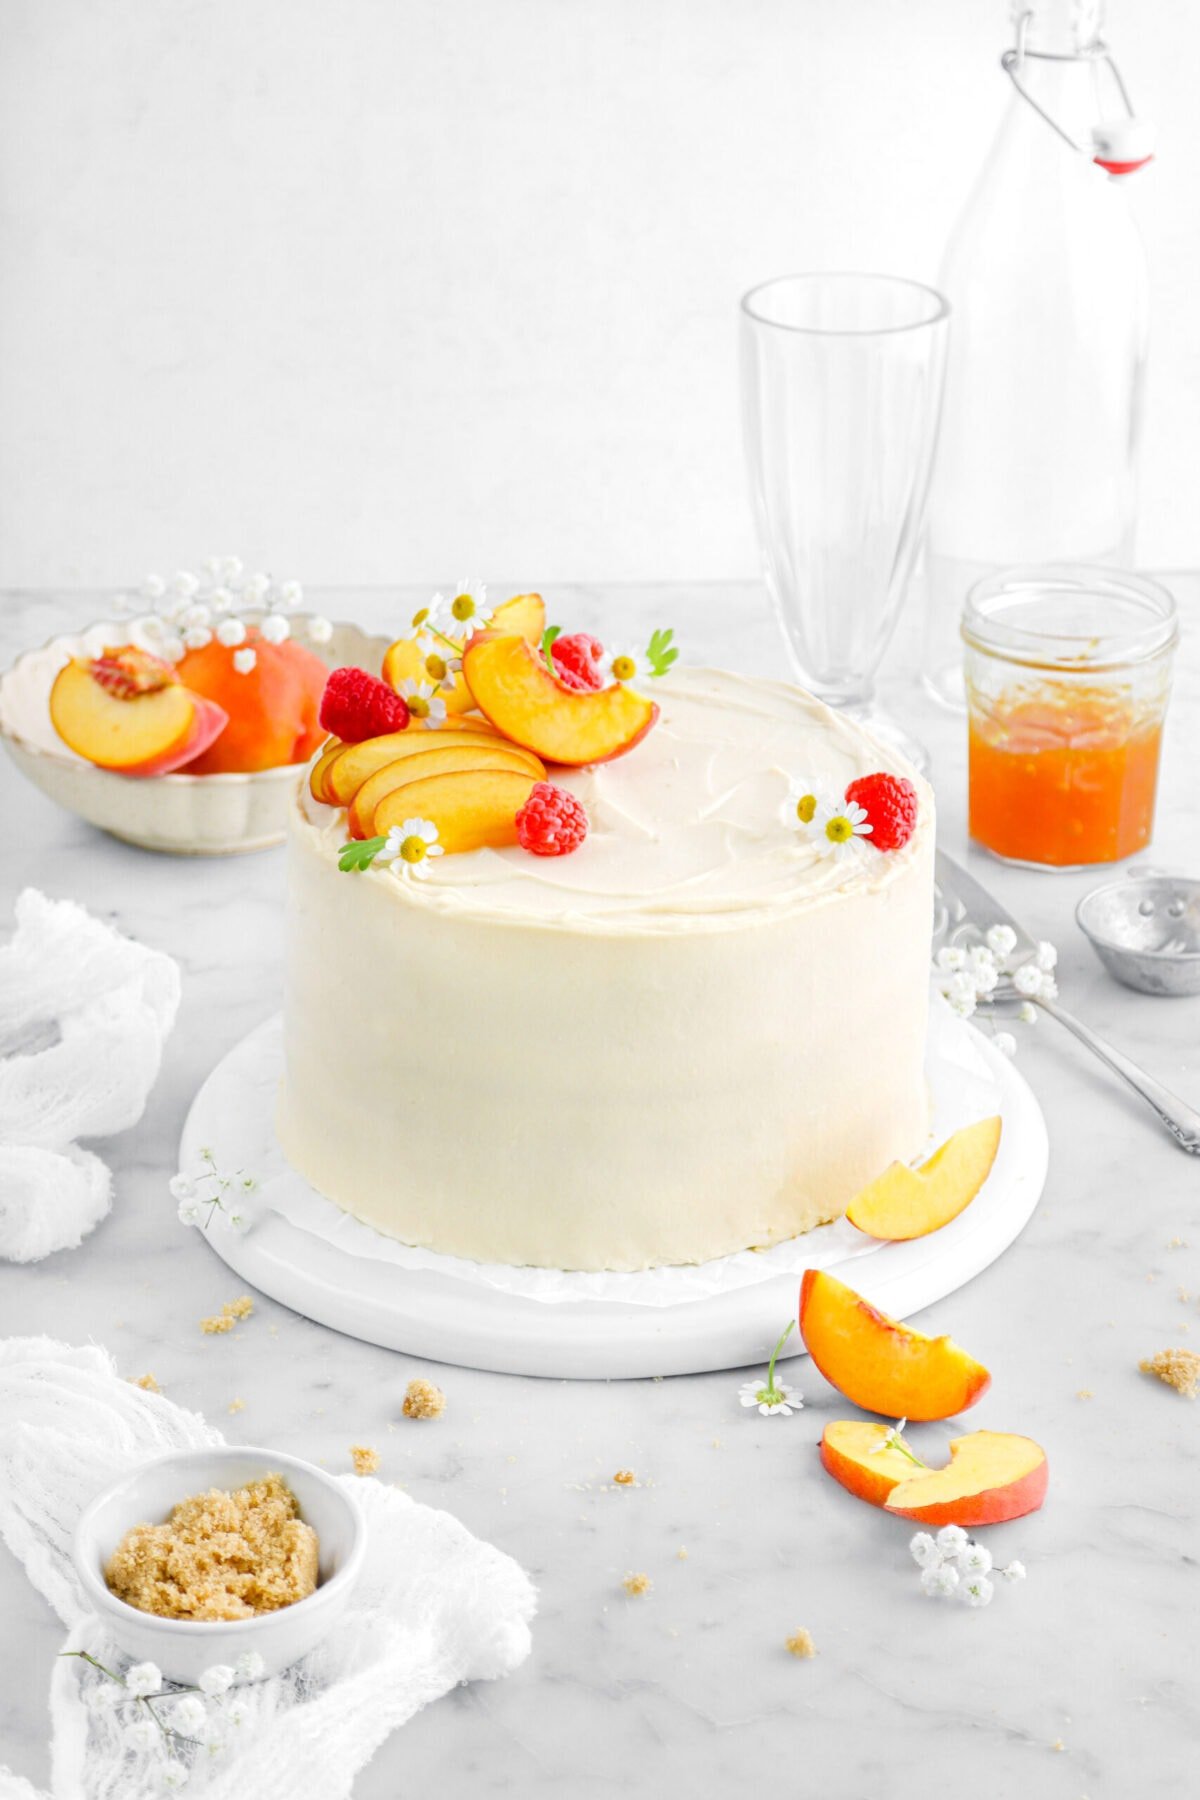 peach cake on upside down white plate with peach slices, raspberries, and chamomile flowers on top of cake, with more peach slices around, a white cheesecloth beside, a jar of peach jam, and two empty glasses behind.